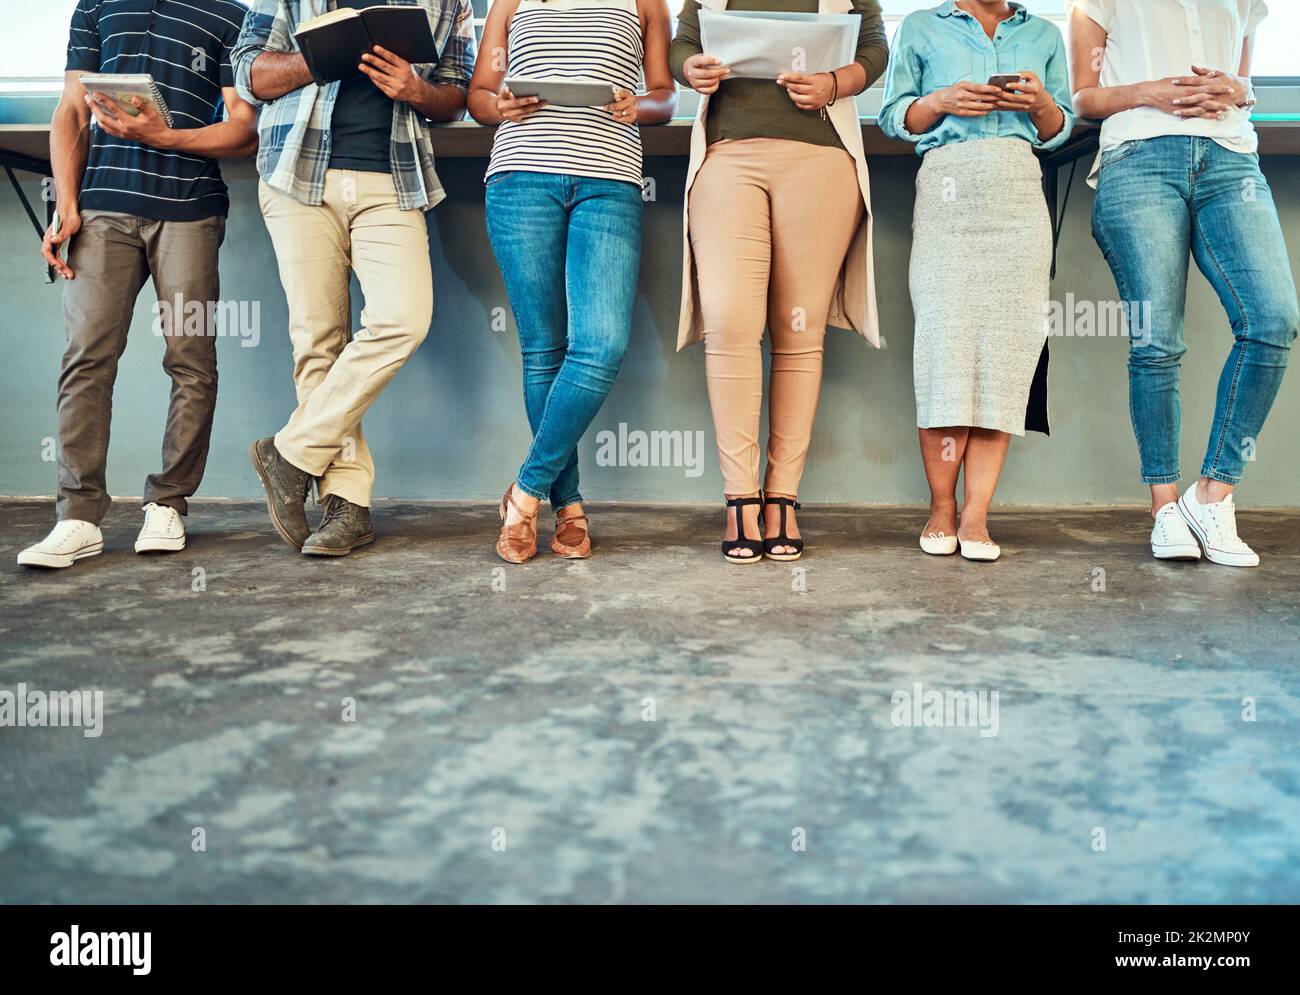 Brainstorming together as a team. Low angle shot of a group of unrecognizable work colleagues standing side by side in a straight line against a wall inside the office during the day. Stock Photo